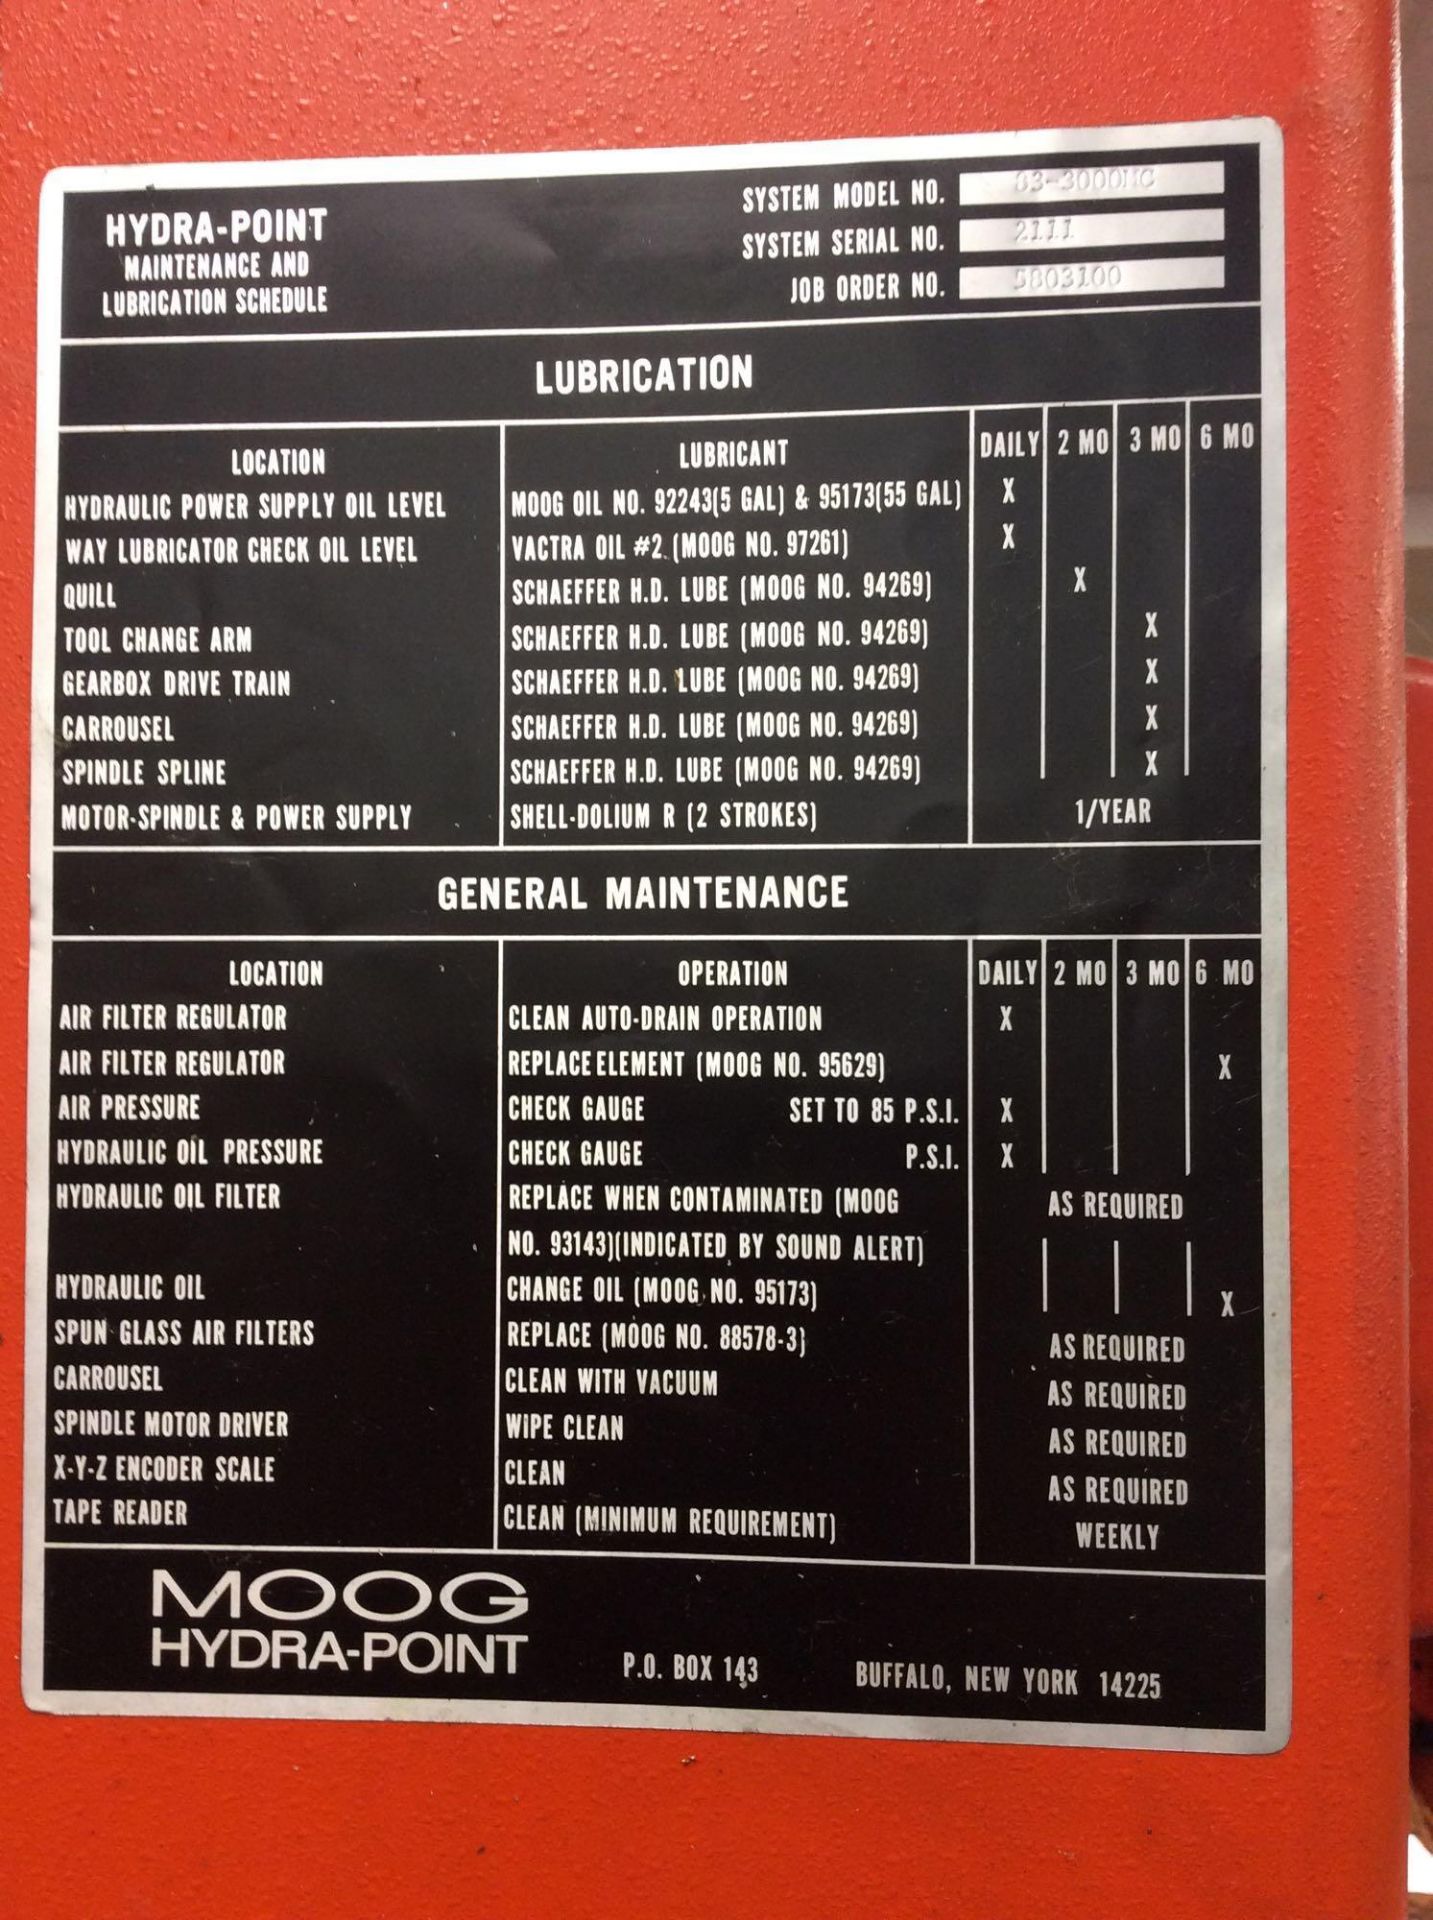 MHP Moog vertical CNC machining center, mn 83-3000, sn 02111, 3-axis, 24 tool holder capacity, Hydro - Image 4 of 7